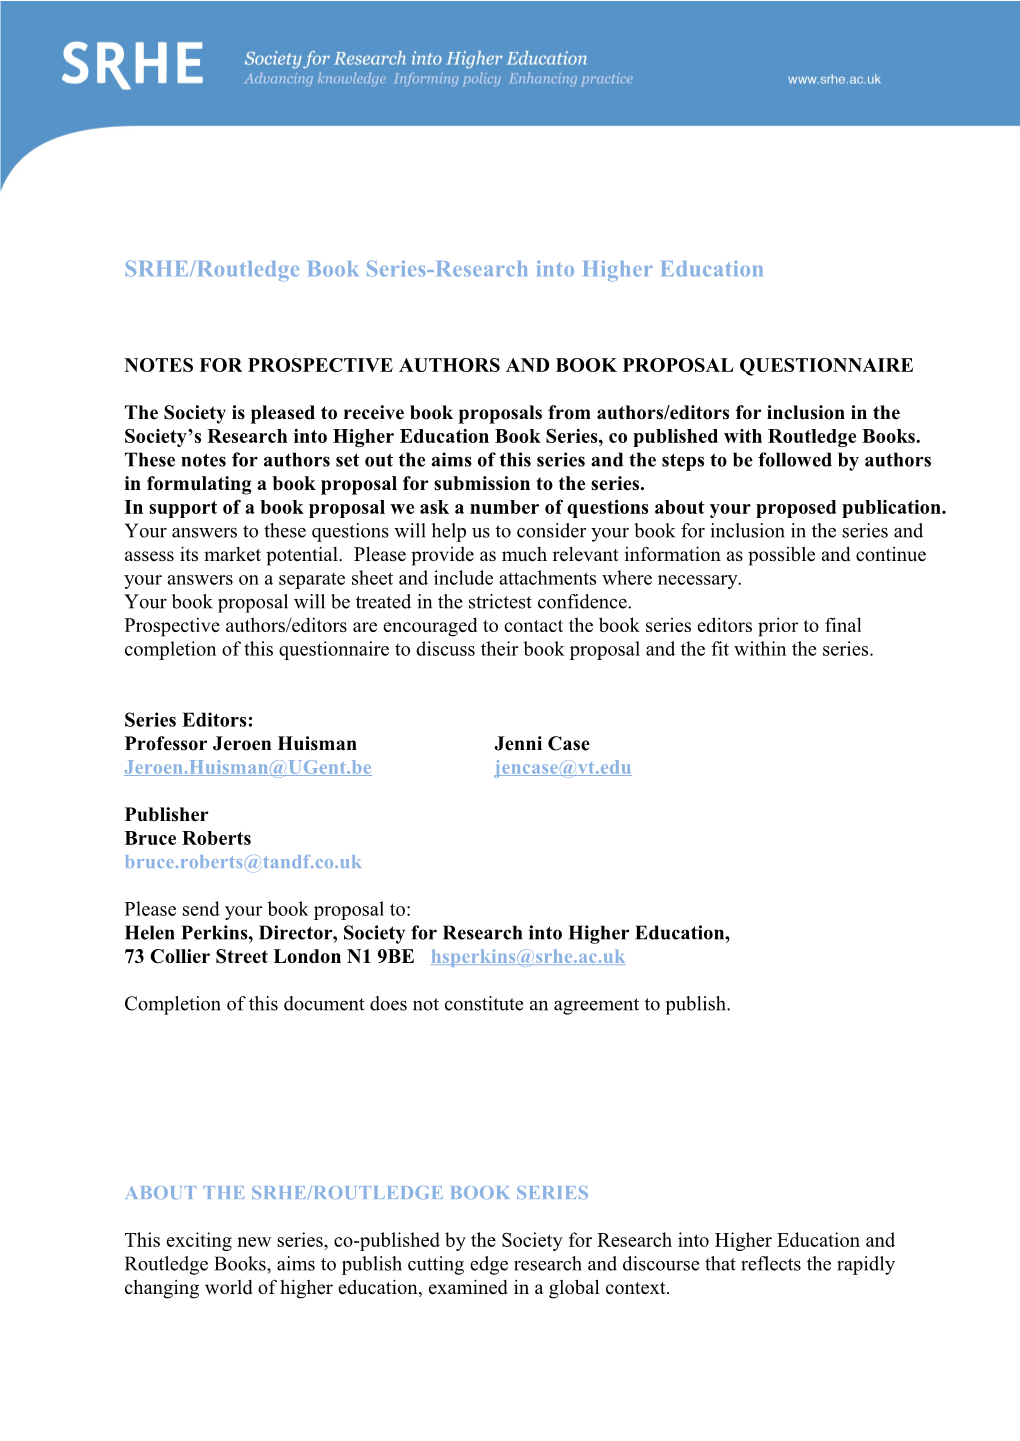 SRHE/Routledge Book Series-Research Into Higher Education